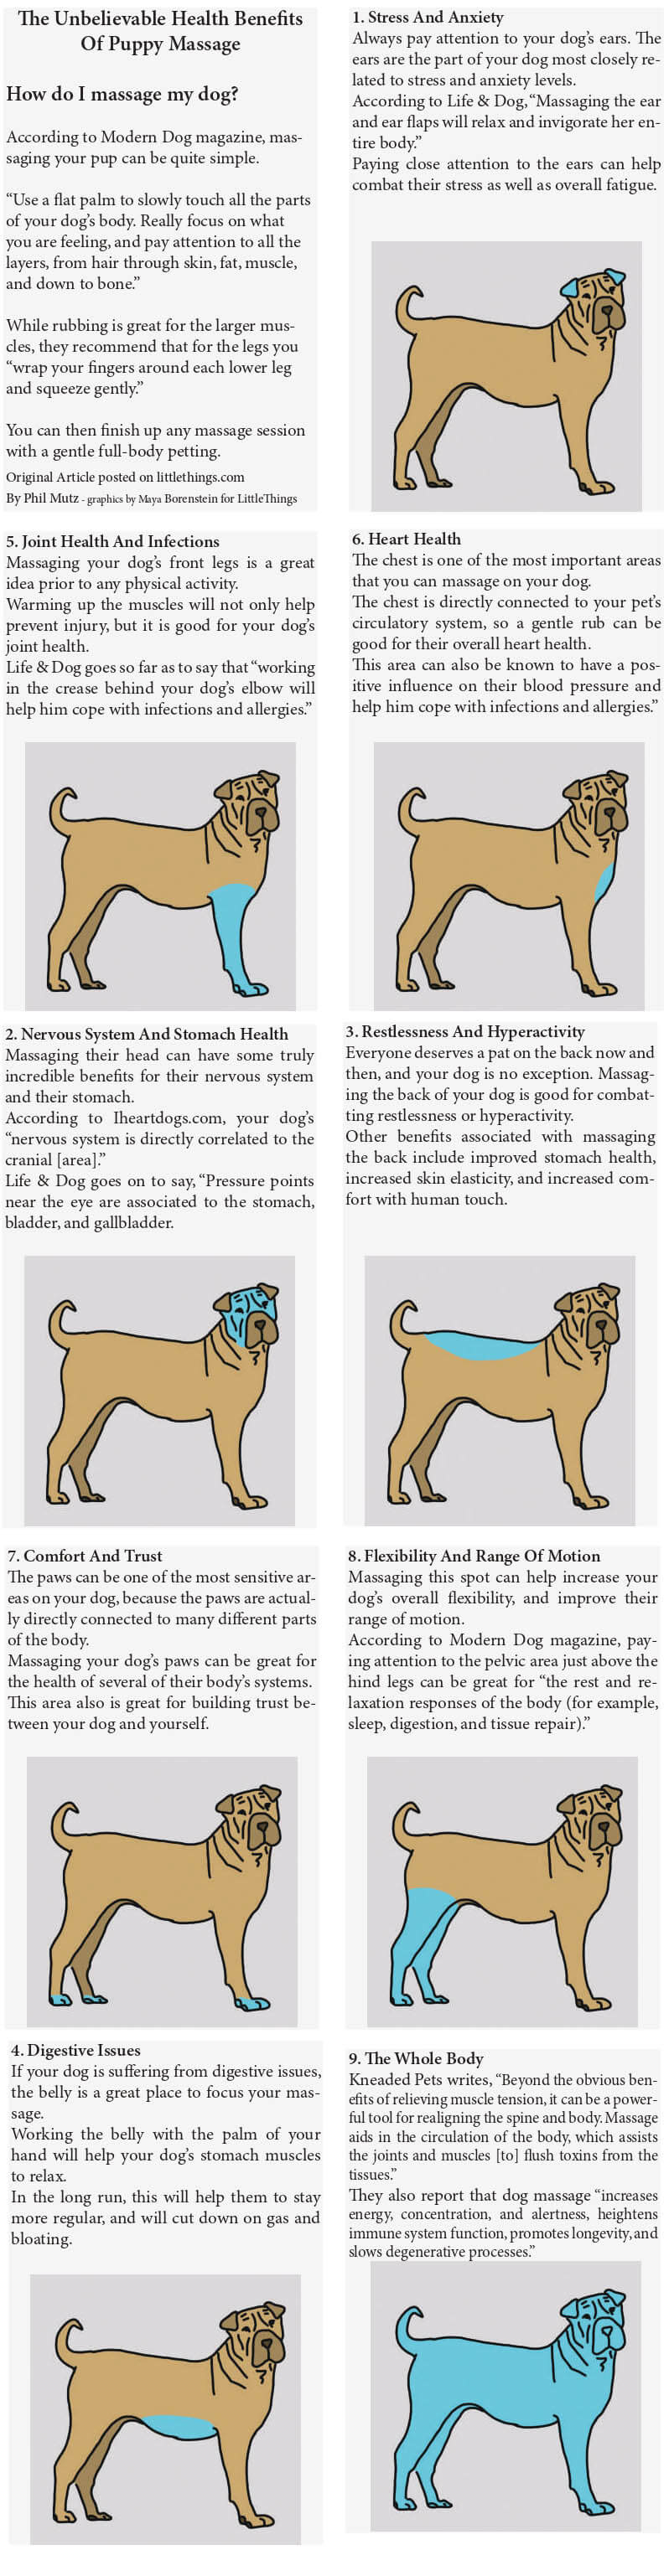 How to Massage a Dog √ Areas to & Relax Your Dog. Benefits of Dog Massage | DOGICA®